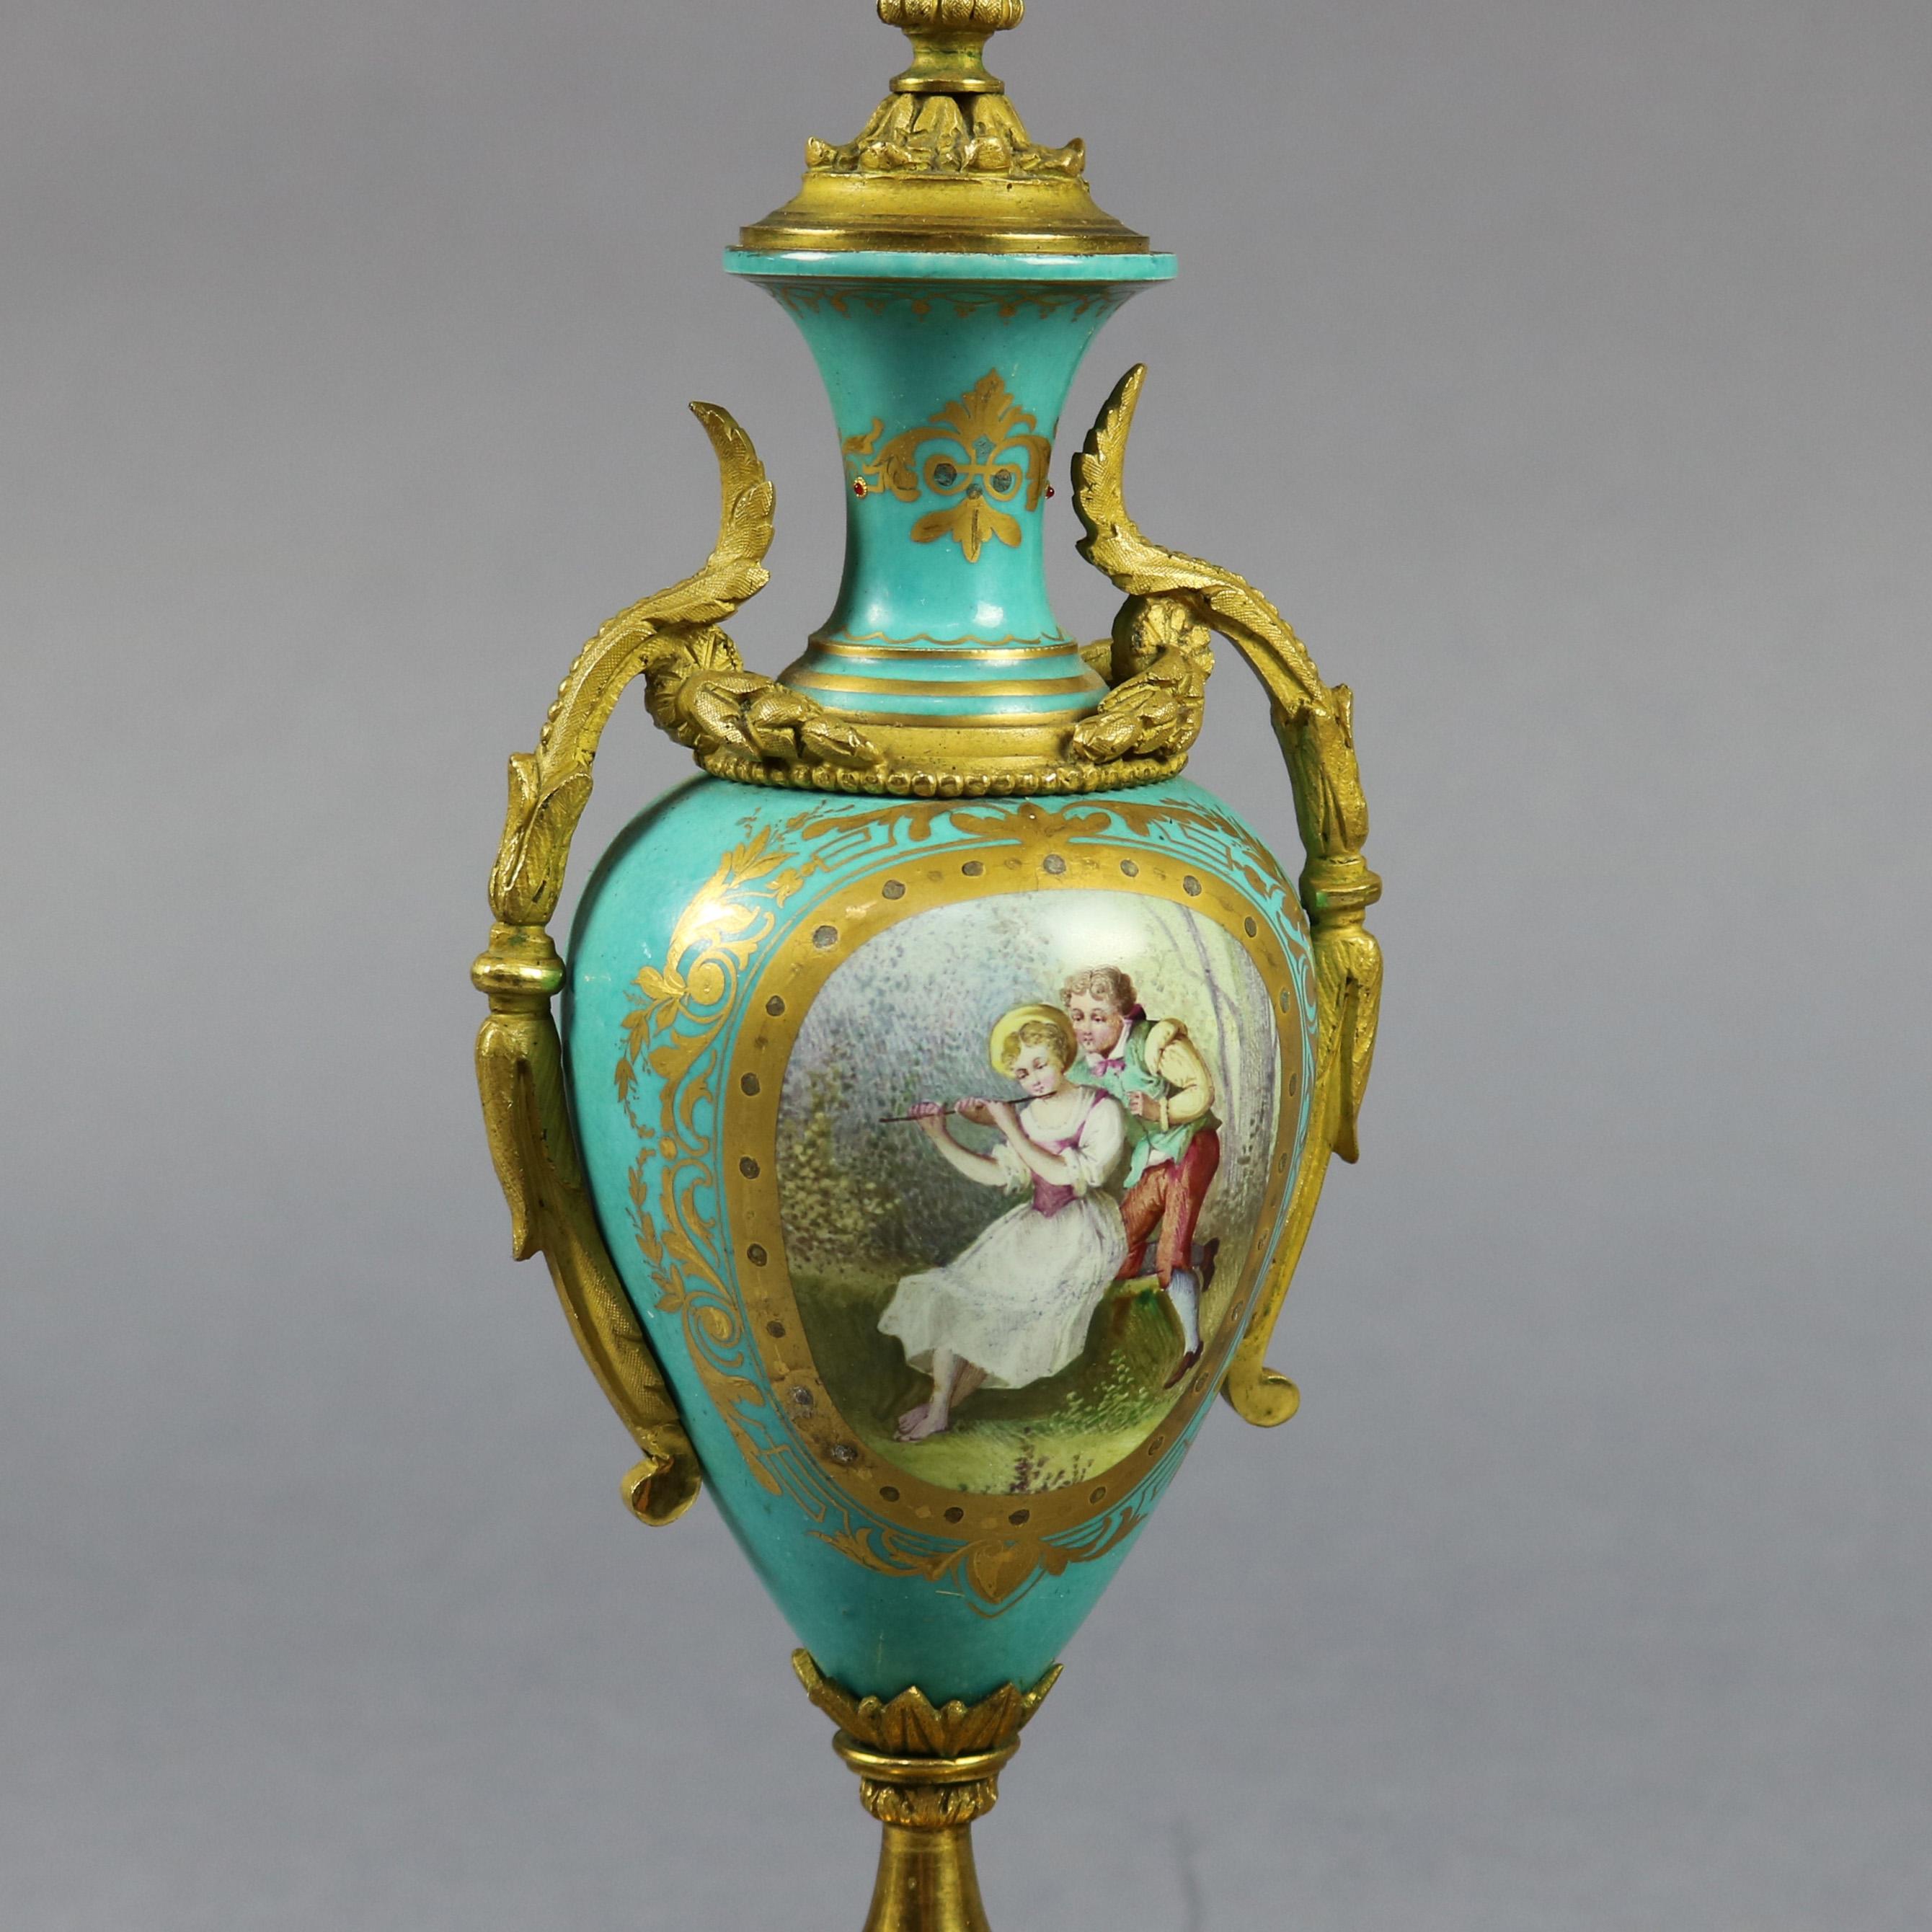 Pair of French Sevres School urns offer hand painted porcelain vessels having reserves with courting couples and landscape scenes, gilt foliate decoration and cast bronze handles, seated on shaped gilt and velvet plinths, circa 1880

Measures: